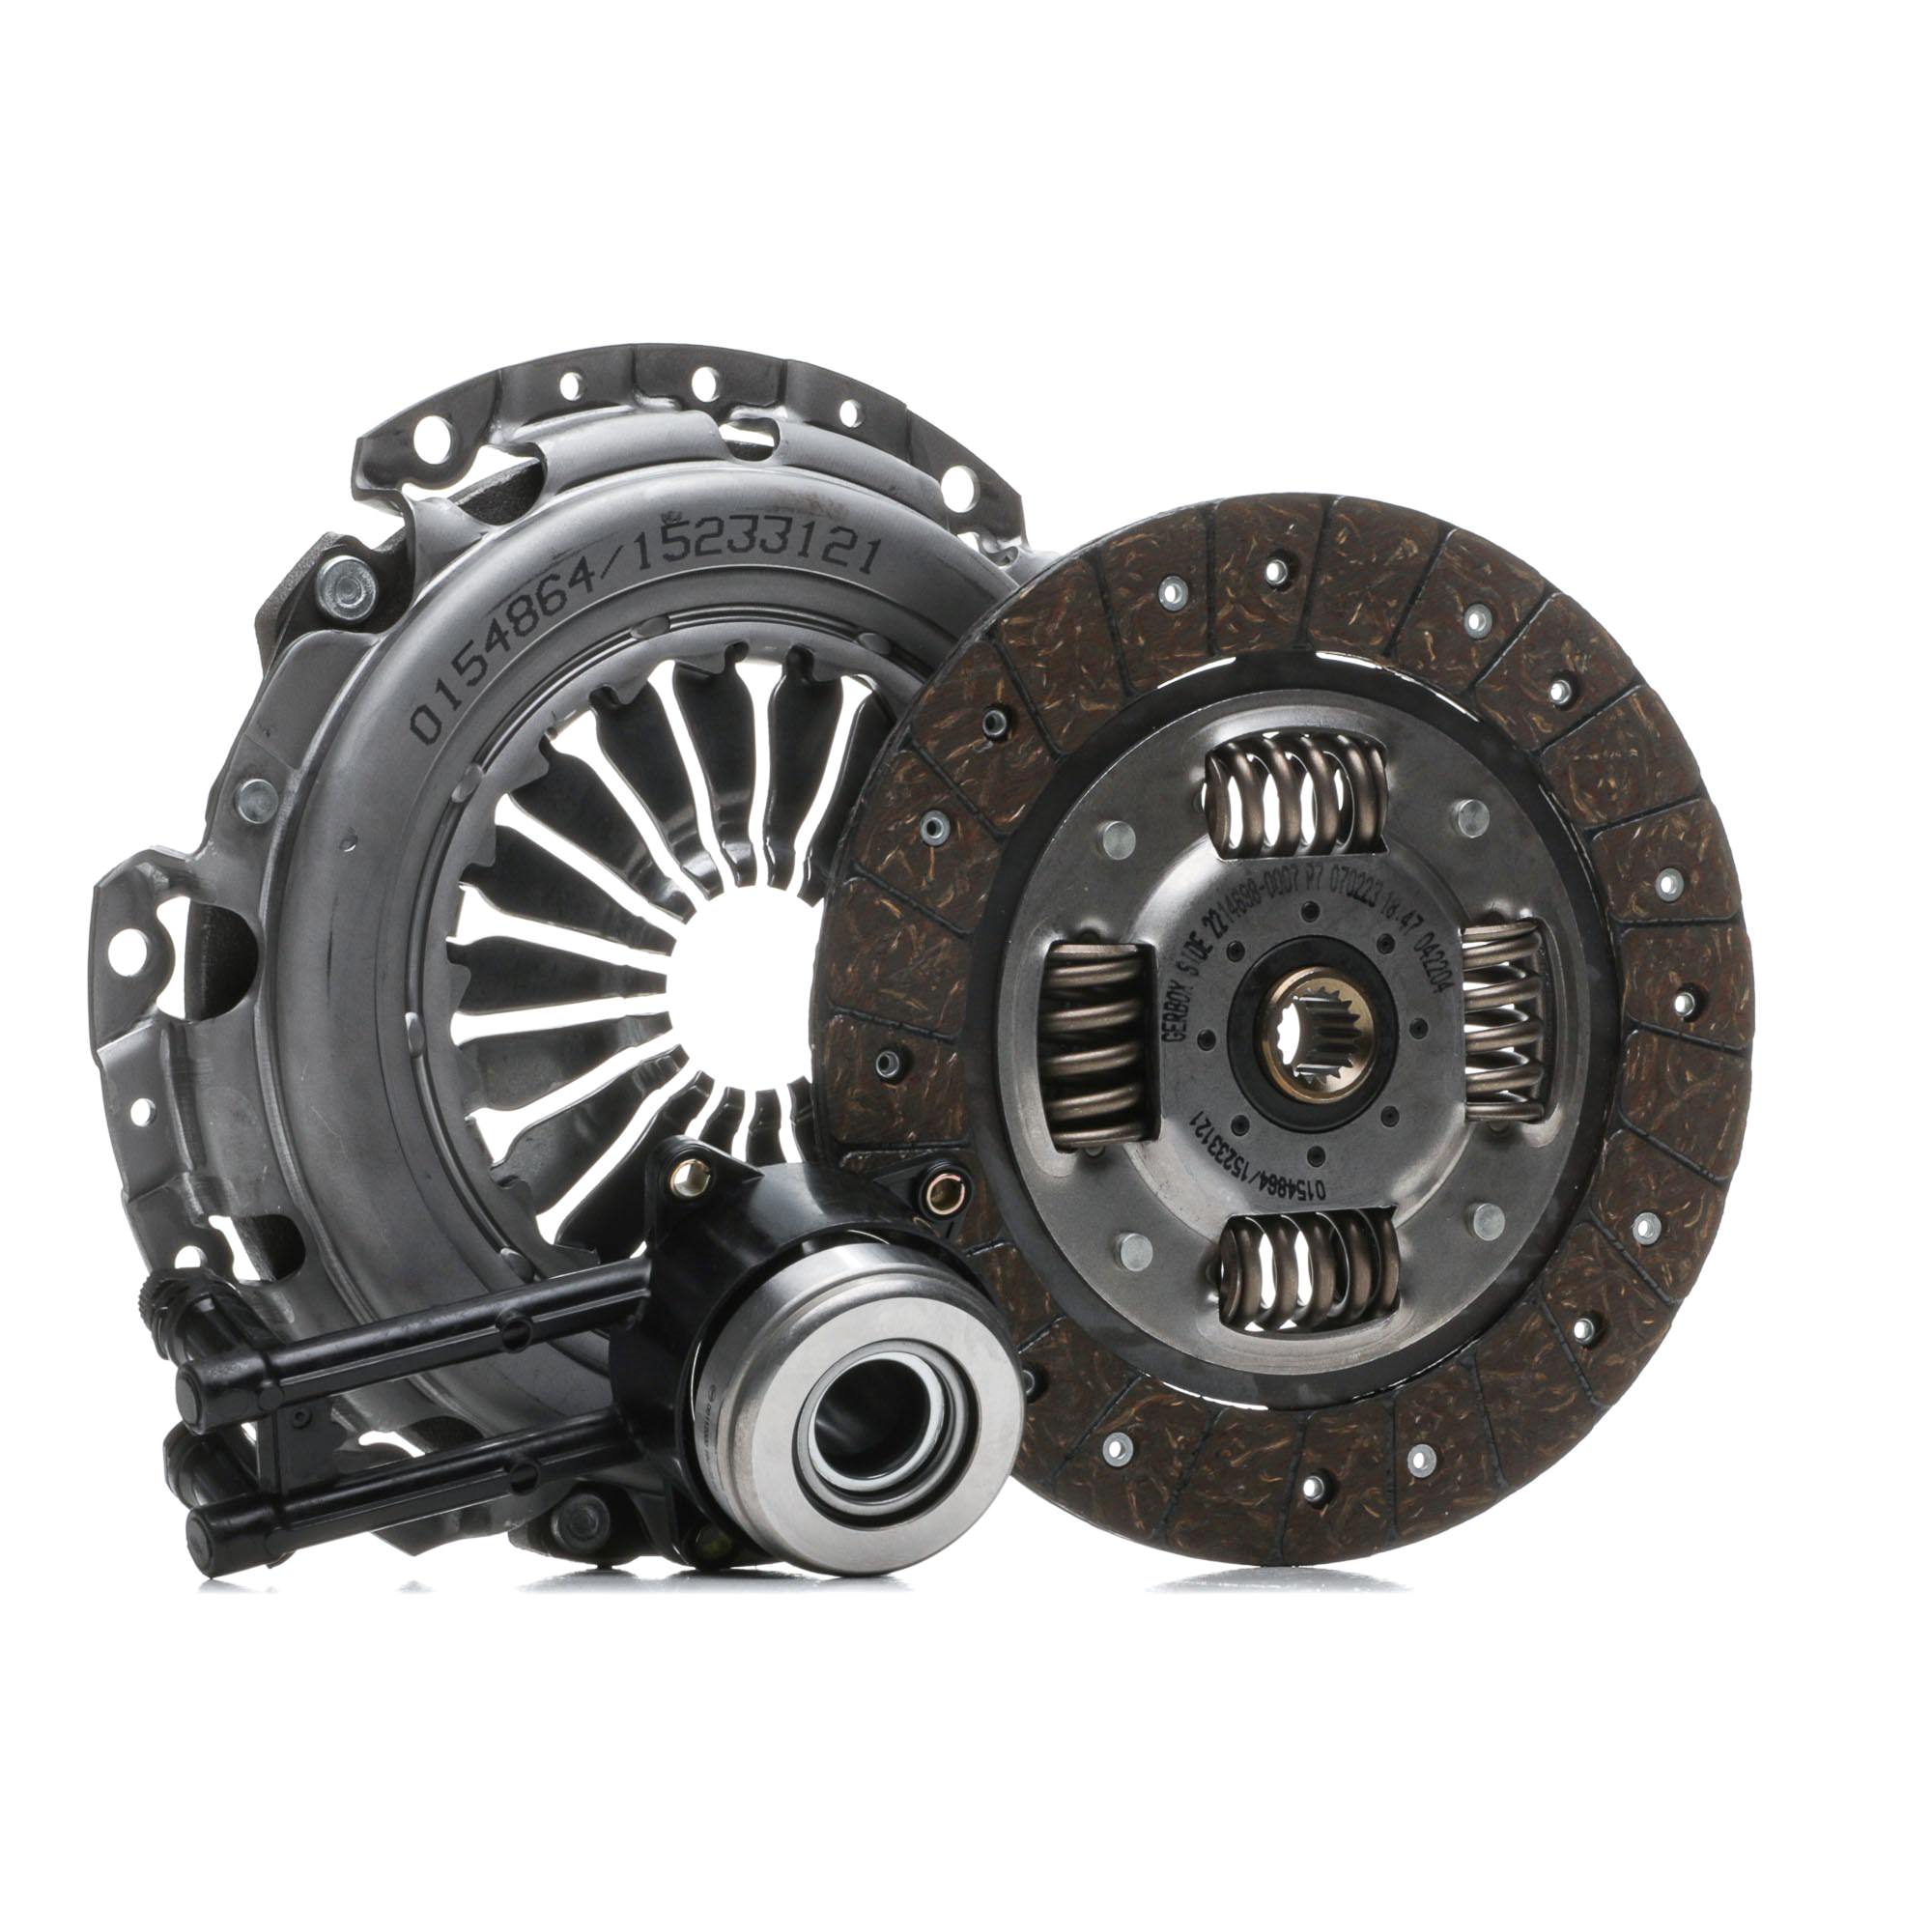 STARK SKCK-0100596 Clutch kit with clutch pressure plate, with central slave cylinder, with clutch disc, 220mm